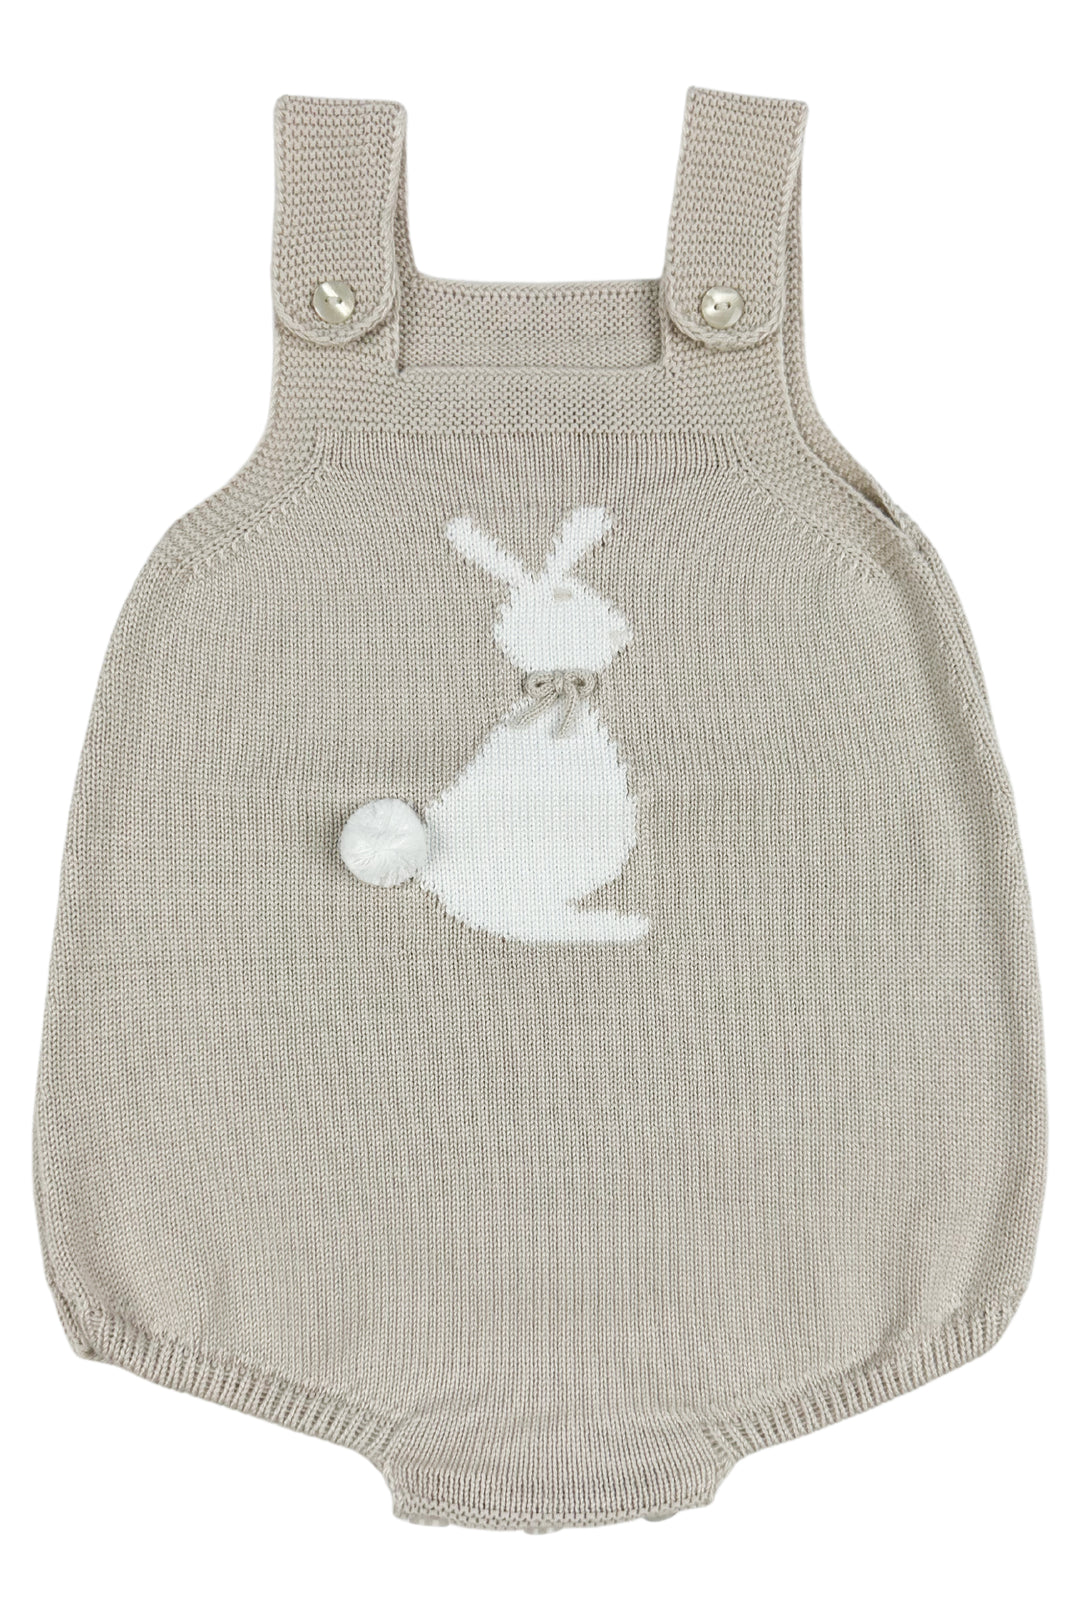 Granlei "Roux" Stone Knit Bunny Dungaree Romper | Millie and John